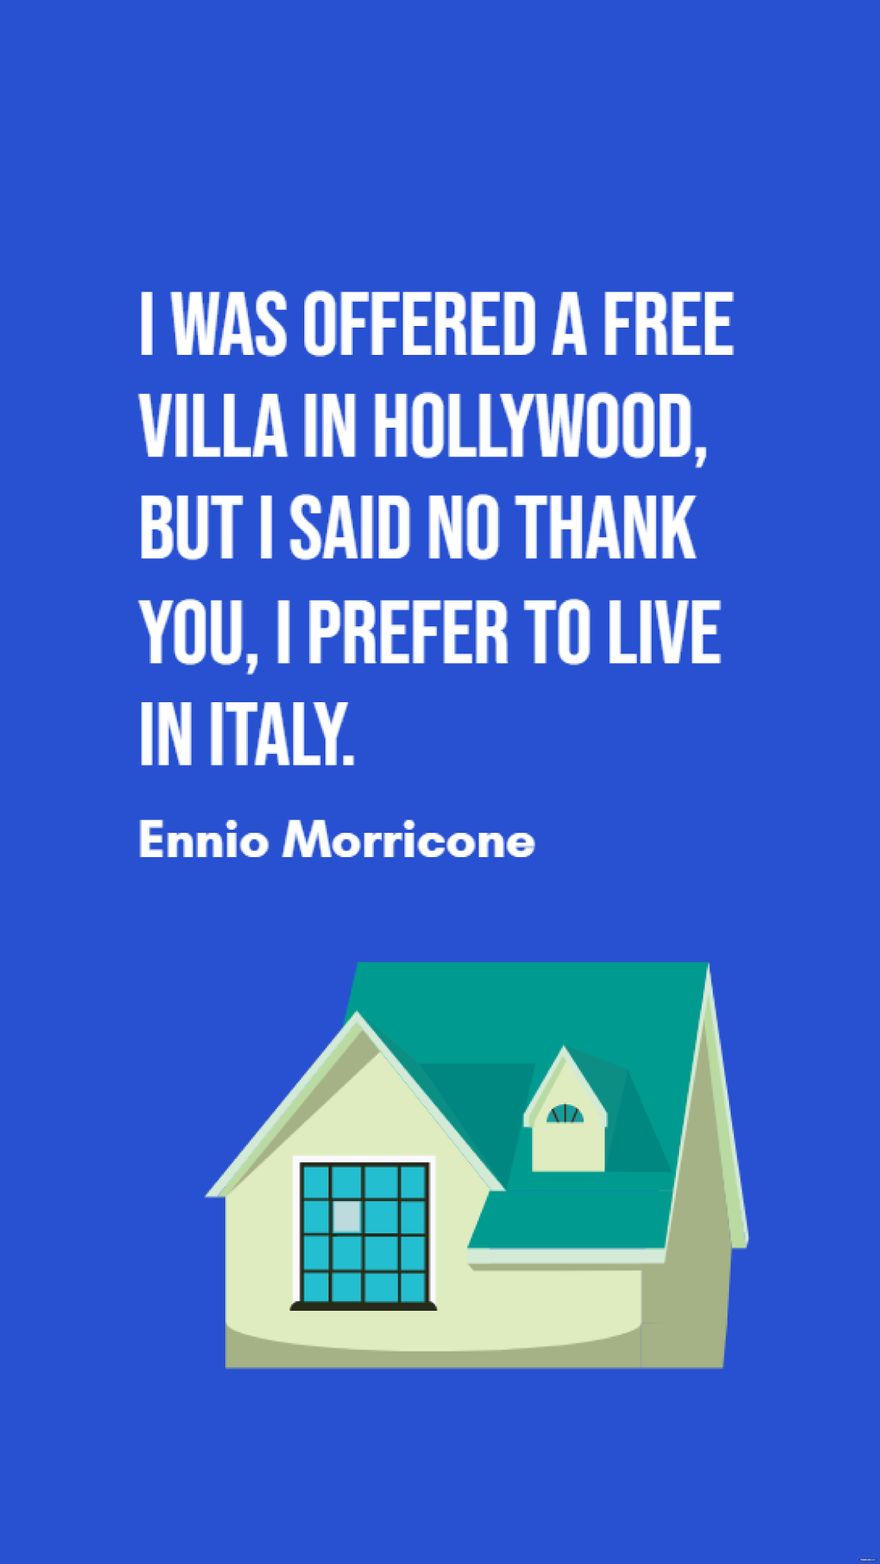 Free Ennio Morricone - I was offered a villa in Hollywood, but I said no thank you, I prefer to live in Italy. in JPG